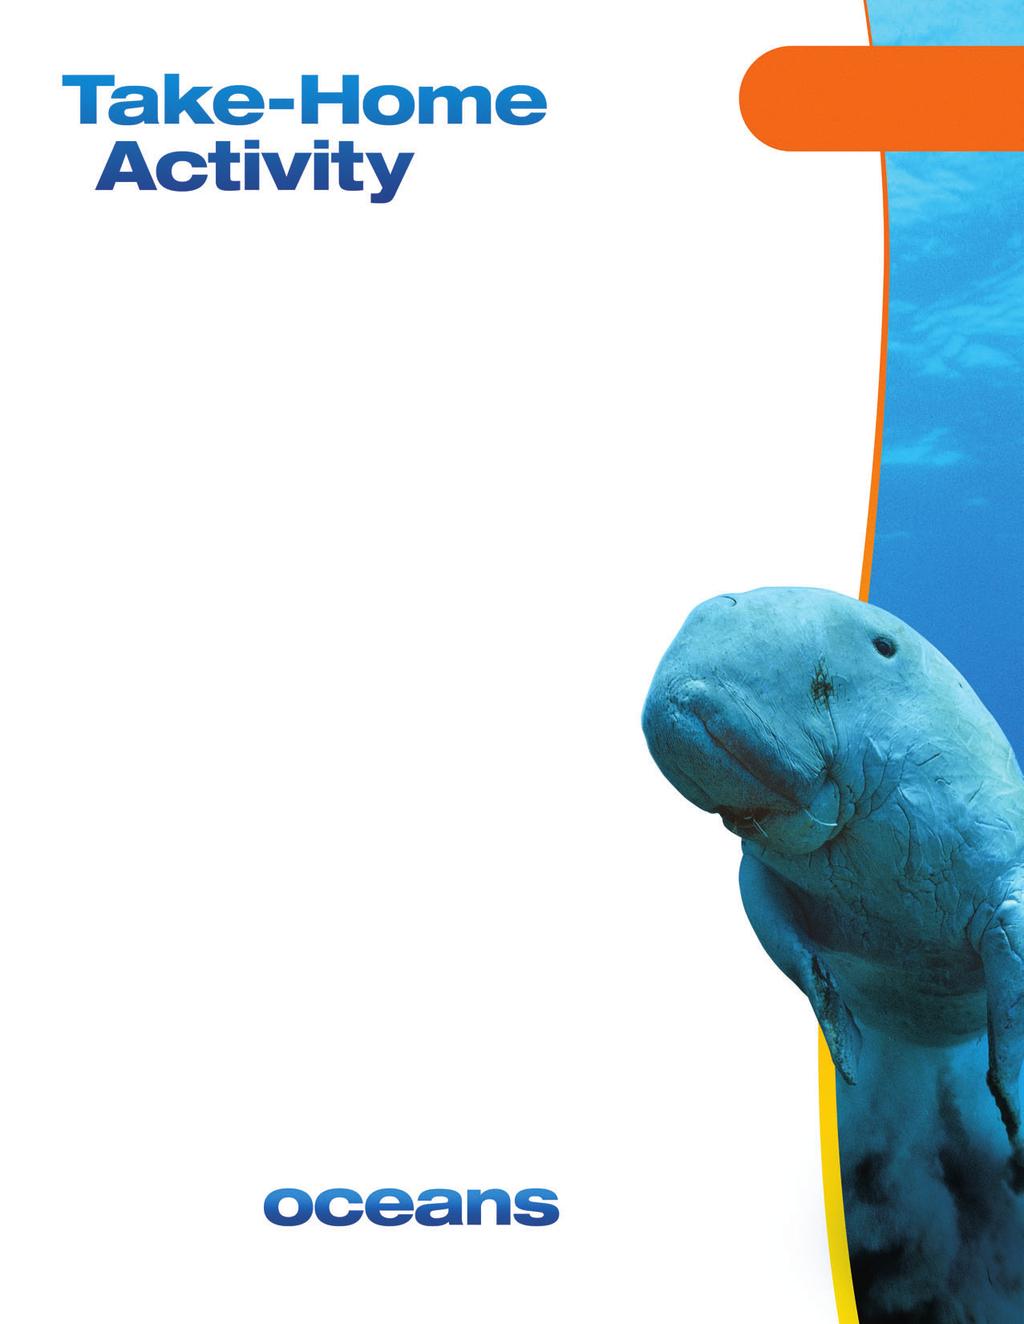 ACTIVITY 4 Check your family s OCEANS IQ with this take-home activity!